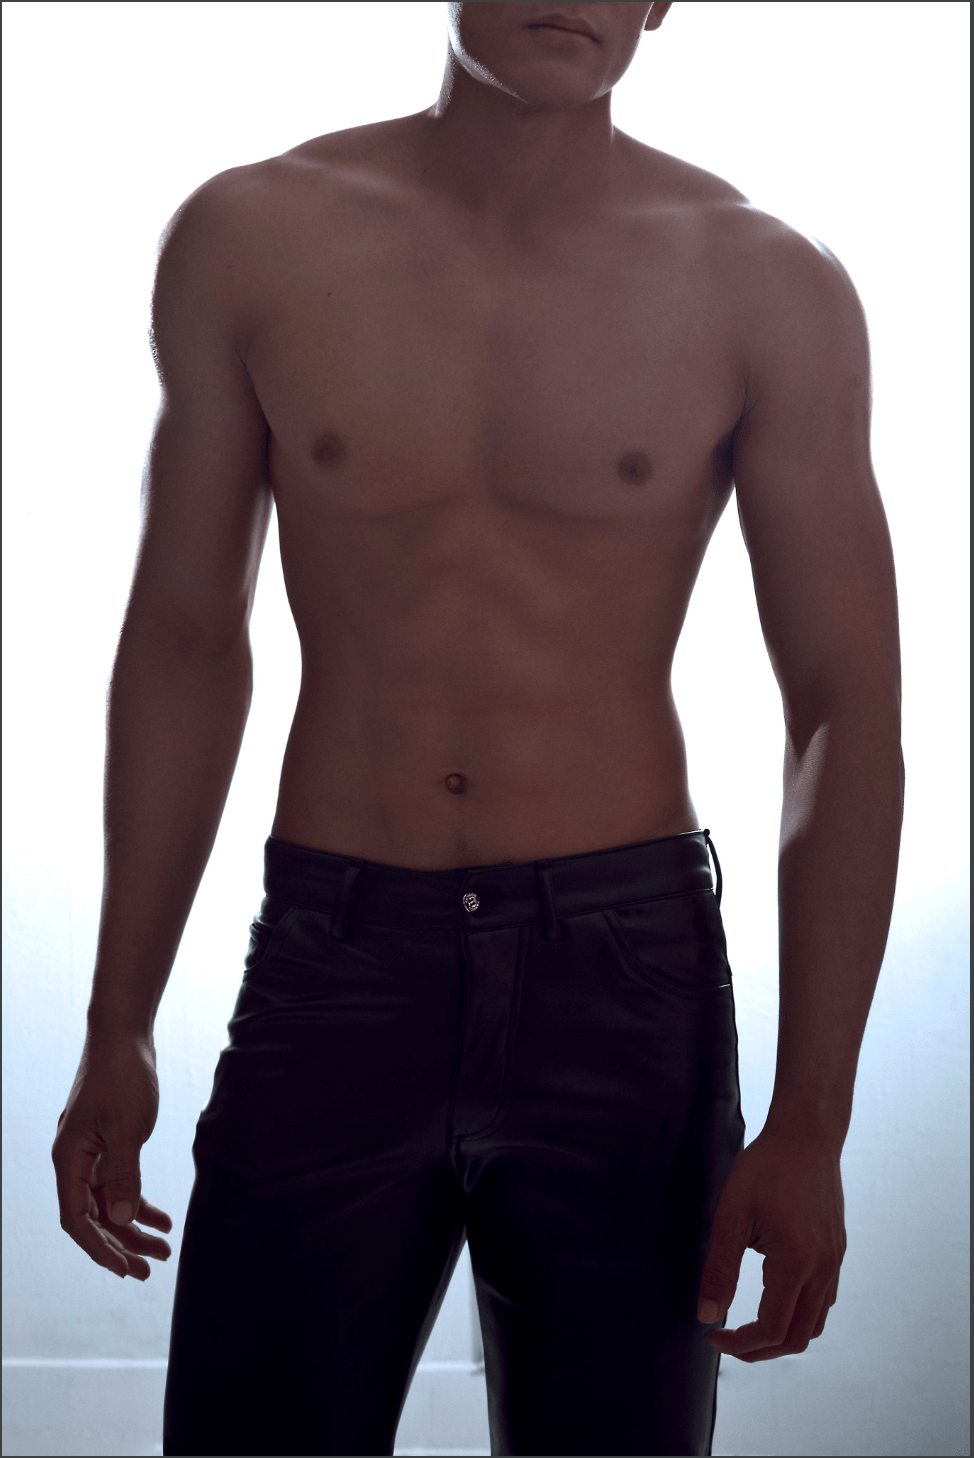 6pack ASIANMMODEL body FITNESSGUY hotbody hotman muscel muscular sexy sexyguy